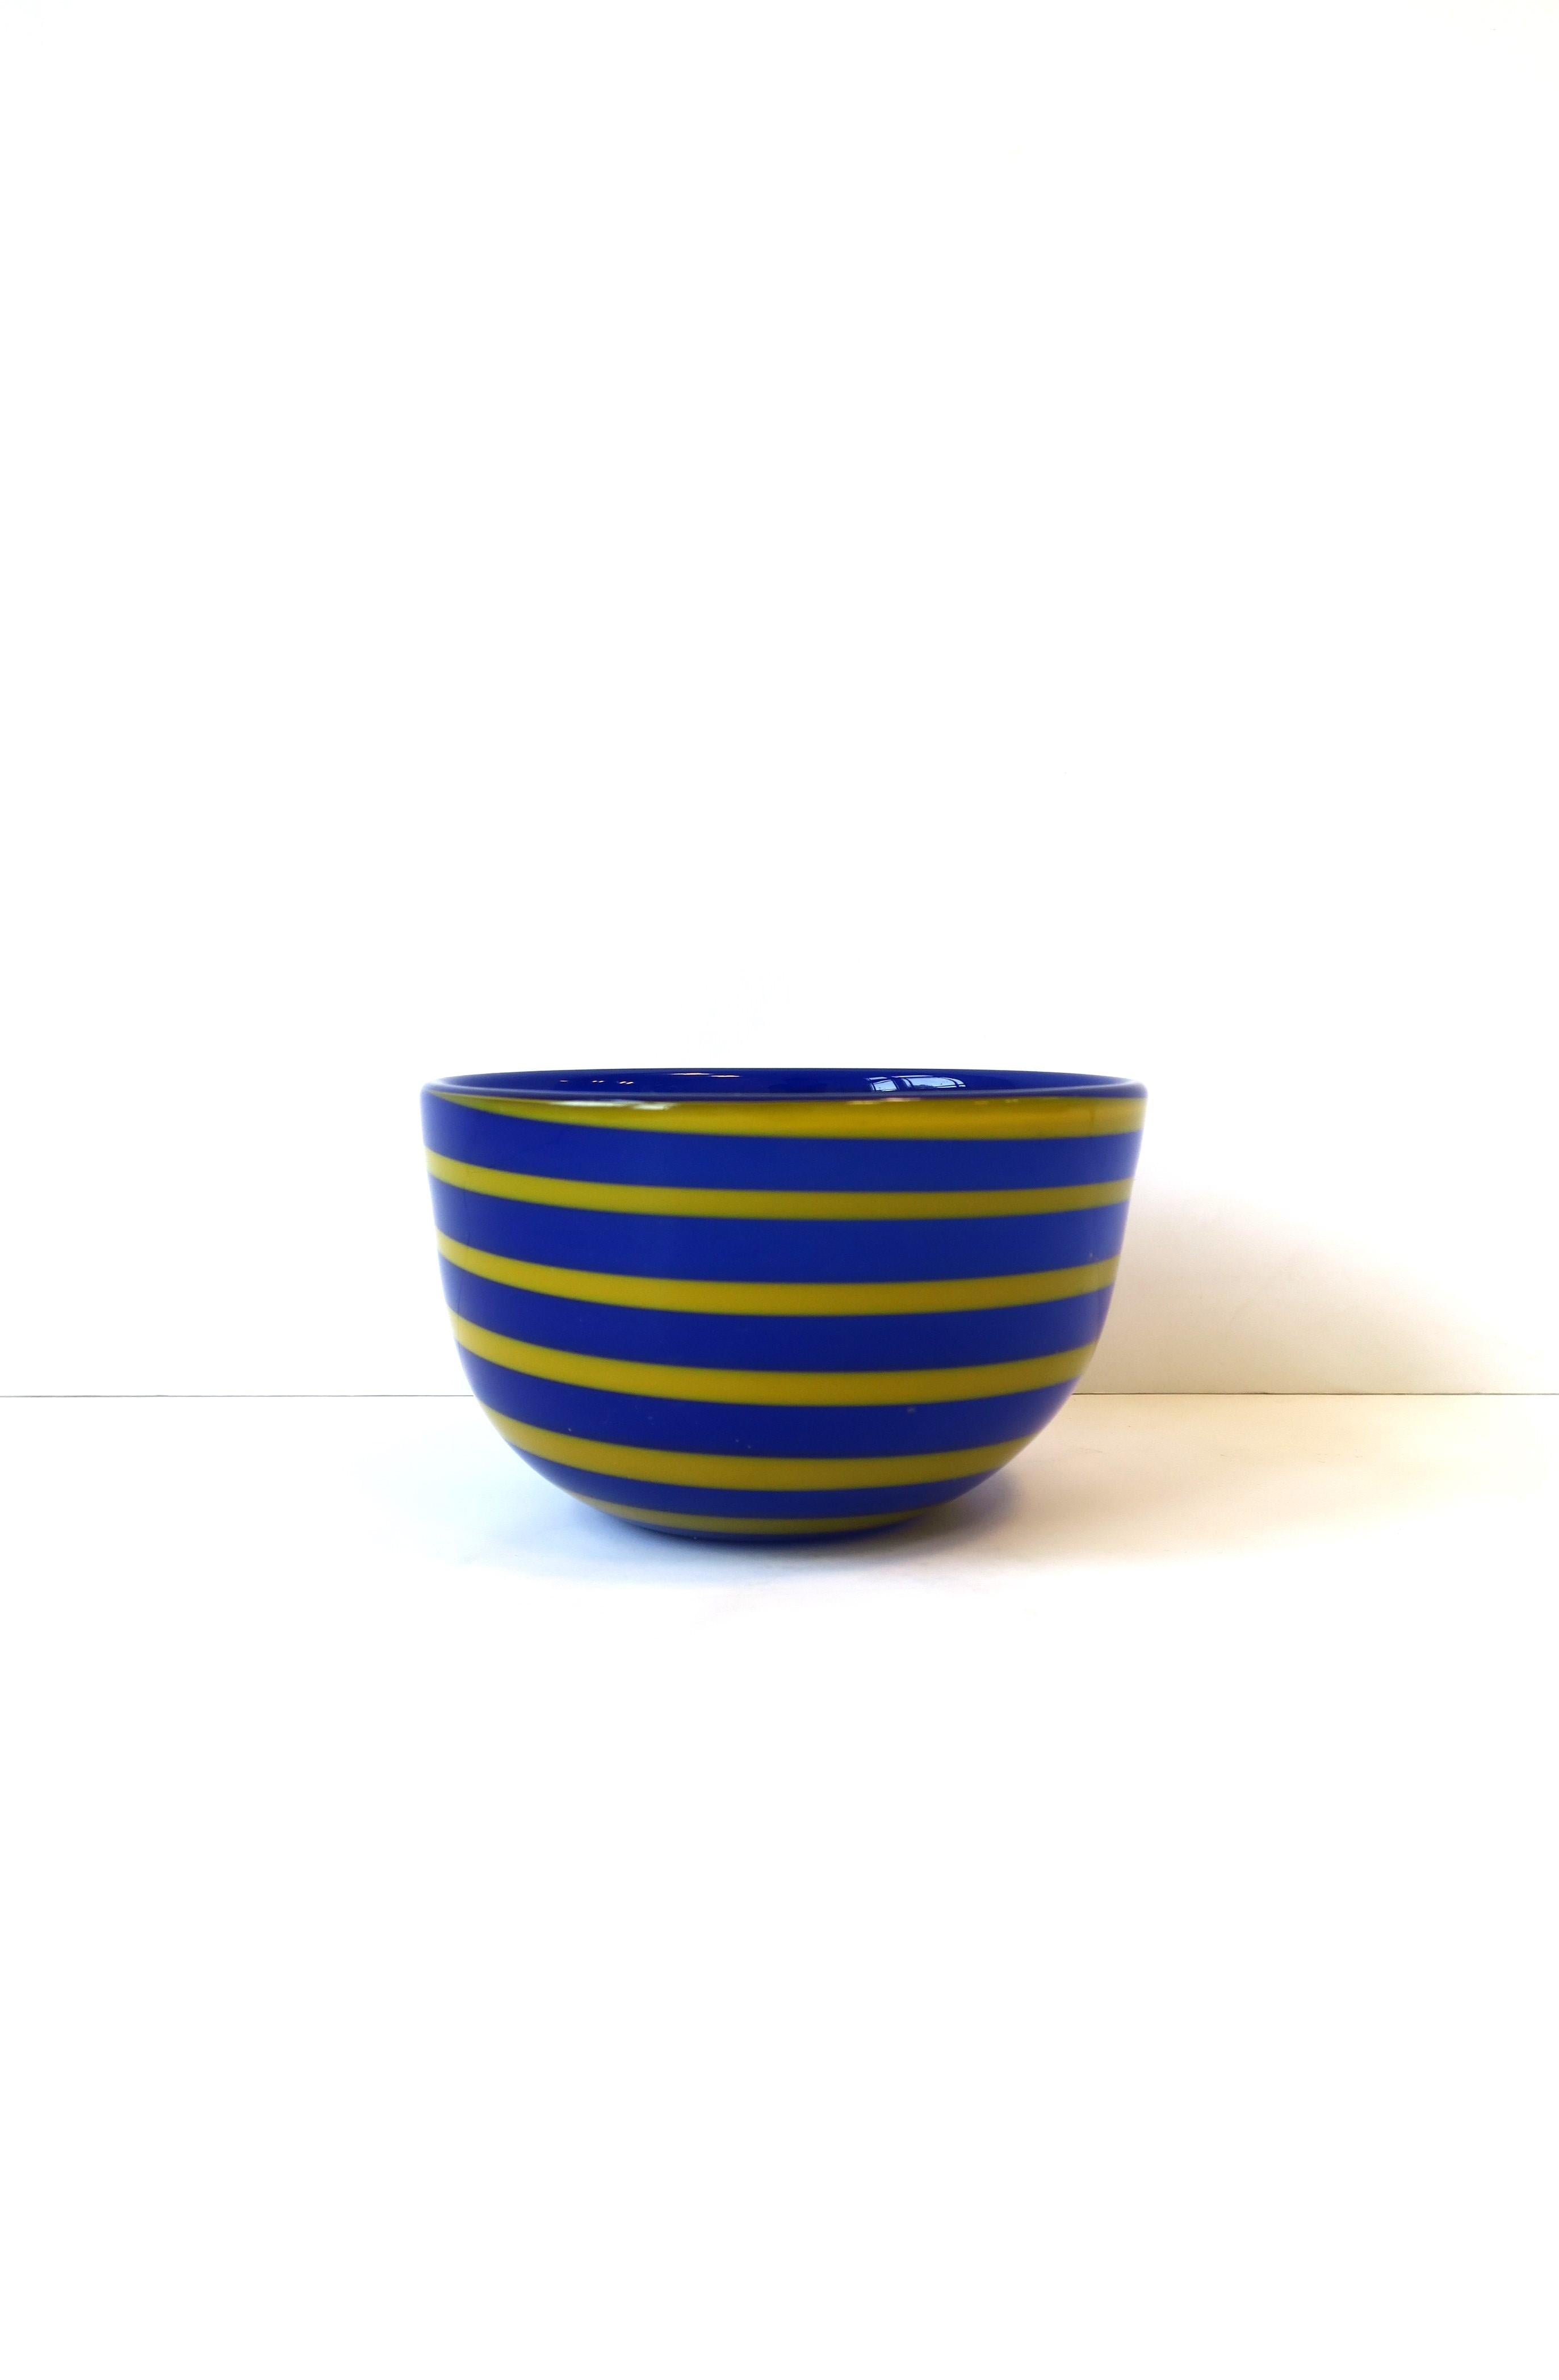 A royal or cobalt blue and yellow art glass bowl, 1995. Great as a stand-alone piece or hold candy or other on a desk, credenza, cocktail table, bookshelf, etc. Marked and dated on underside as shown in last image. Dimensions: 5.32